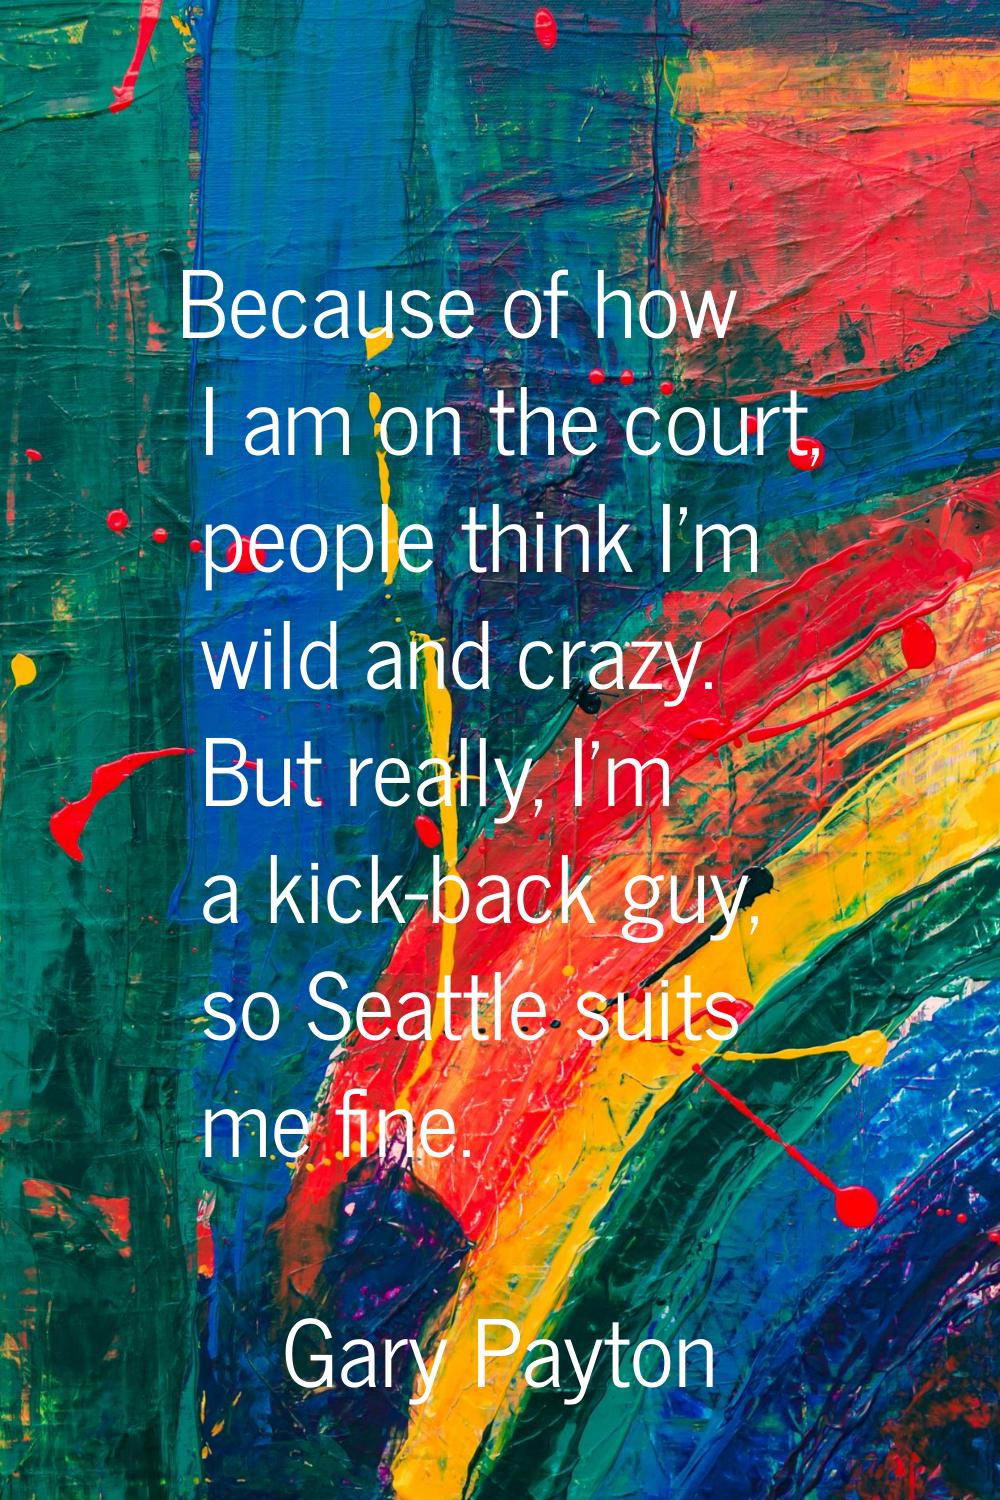 Because of how I am on the court, people think I'm wild and crazy. But really, I'm a kick-back guy,